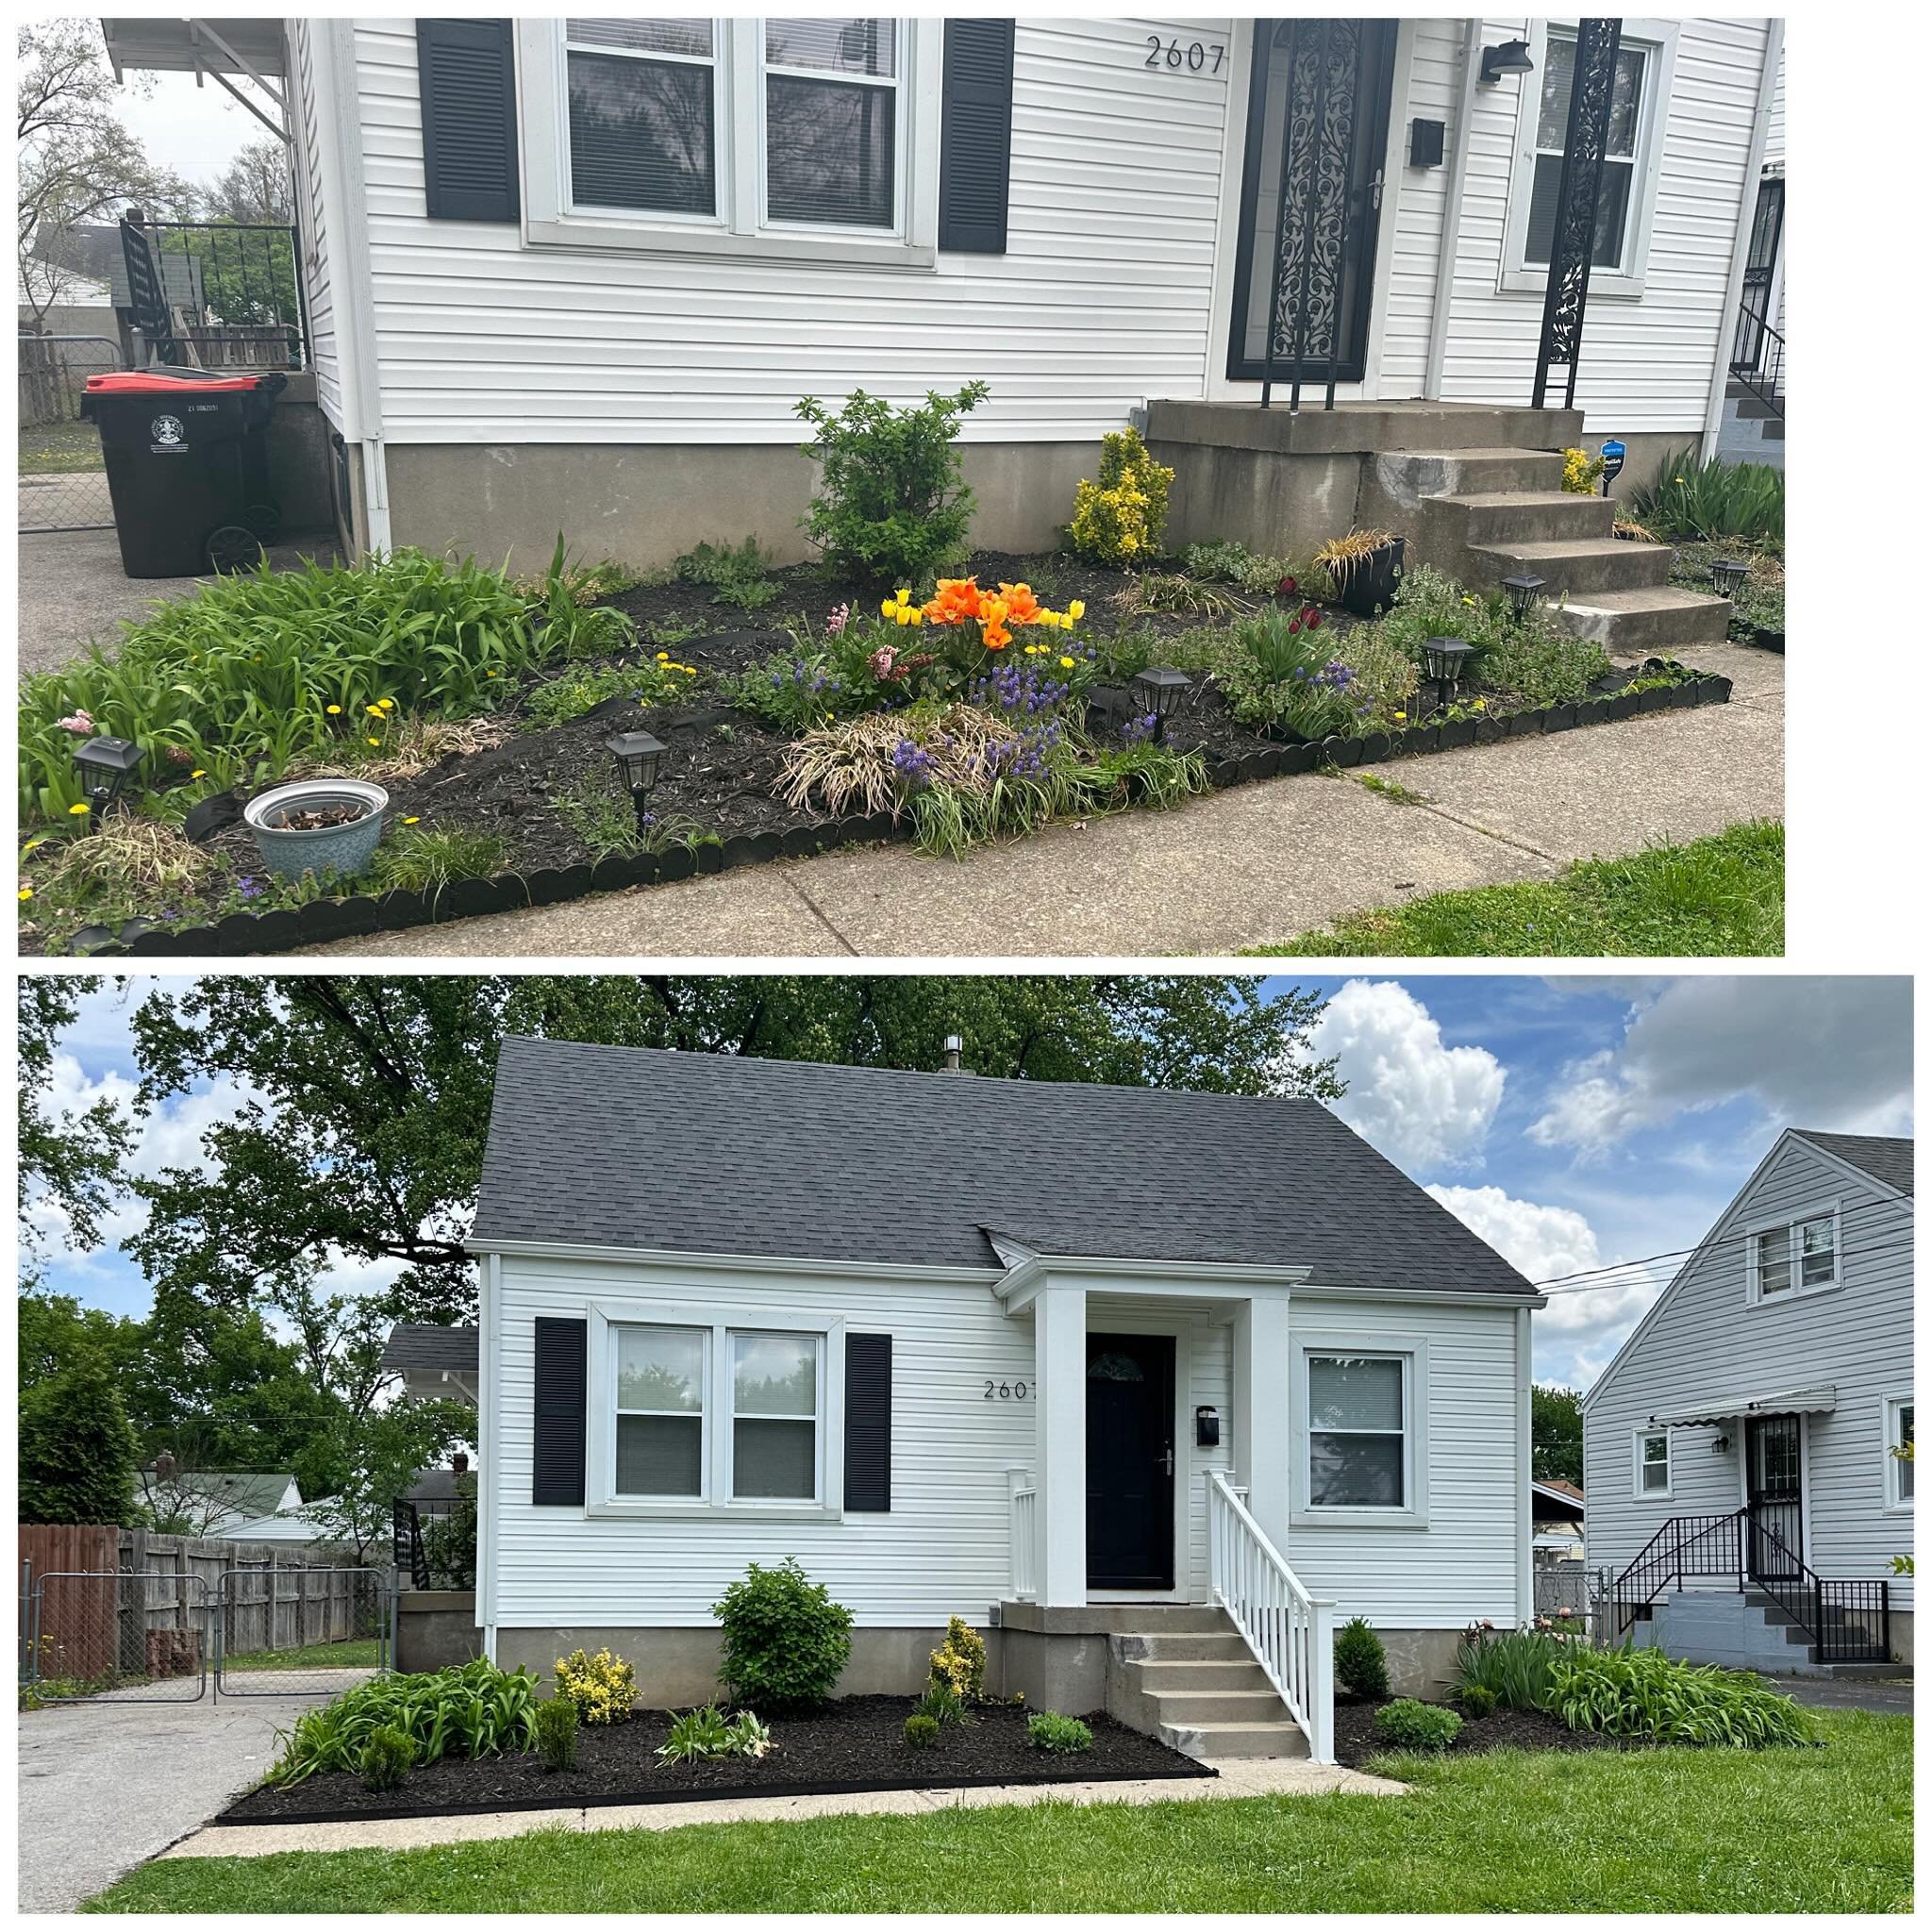 Another #beforeandafter #transformationtuesday!!

My investor client purchased this adorable property last month. The front was very overgrown with tons of weeds, landscaping fabric showing, broken borders, etc.

The front porch was also missing the 